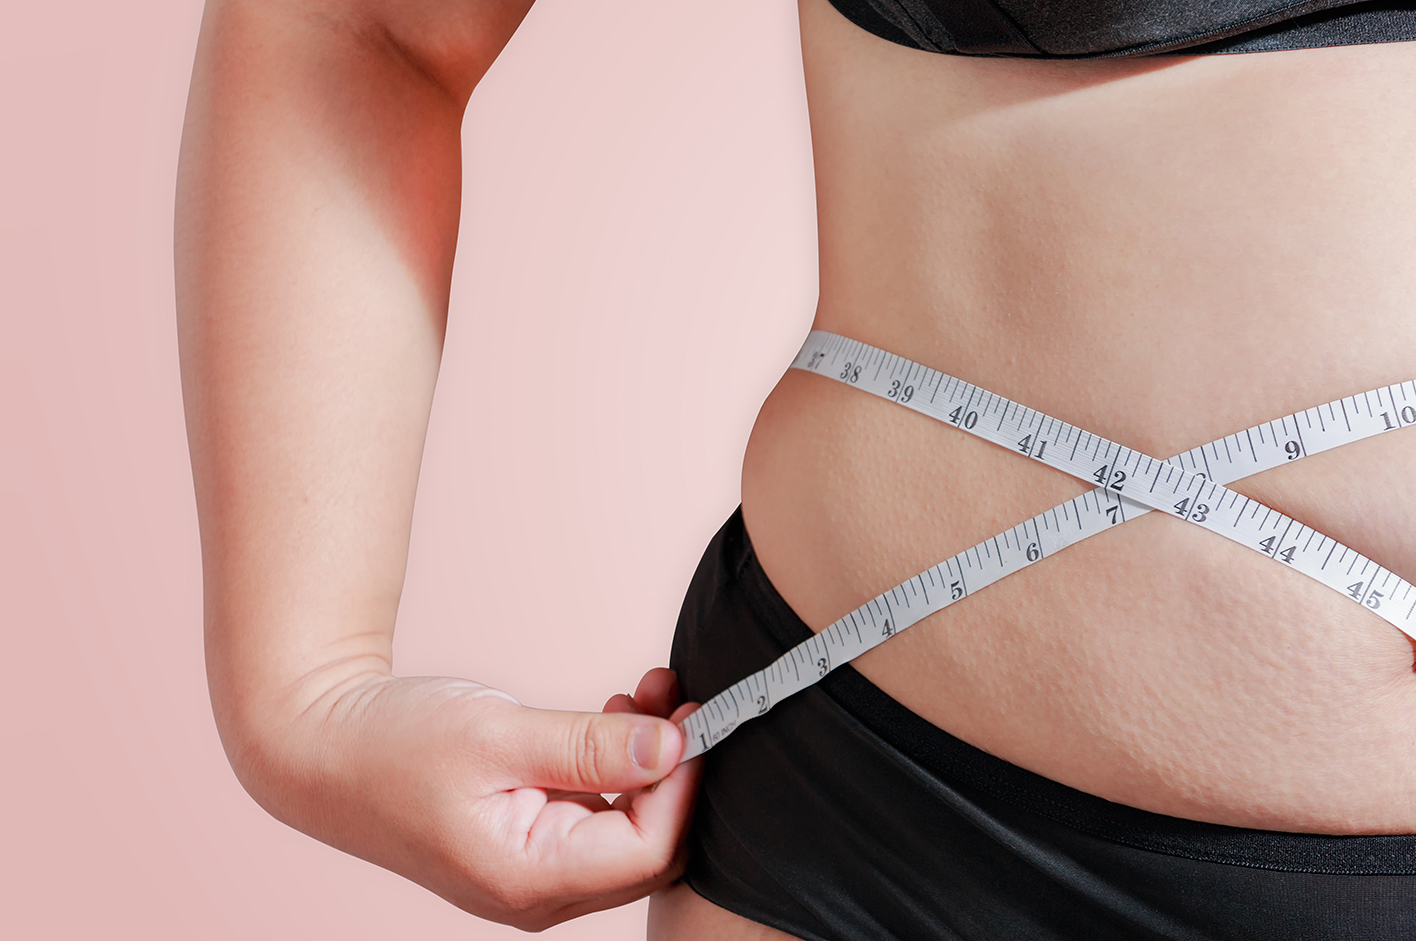 Ultimate Guide to Preparing for Your Tummy Tuck Surgery